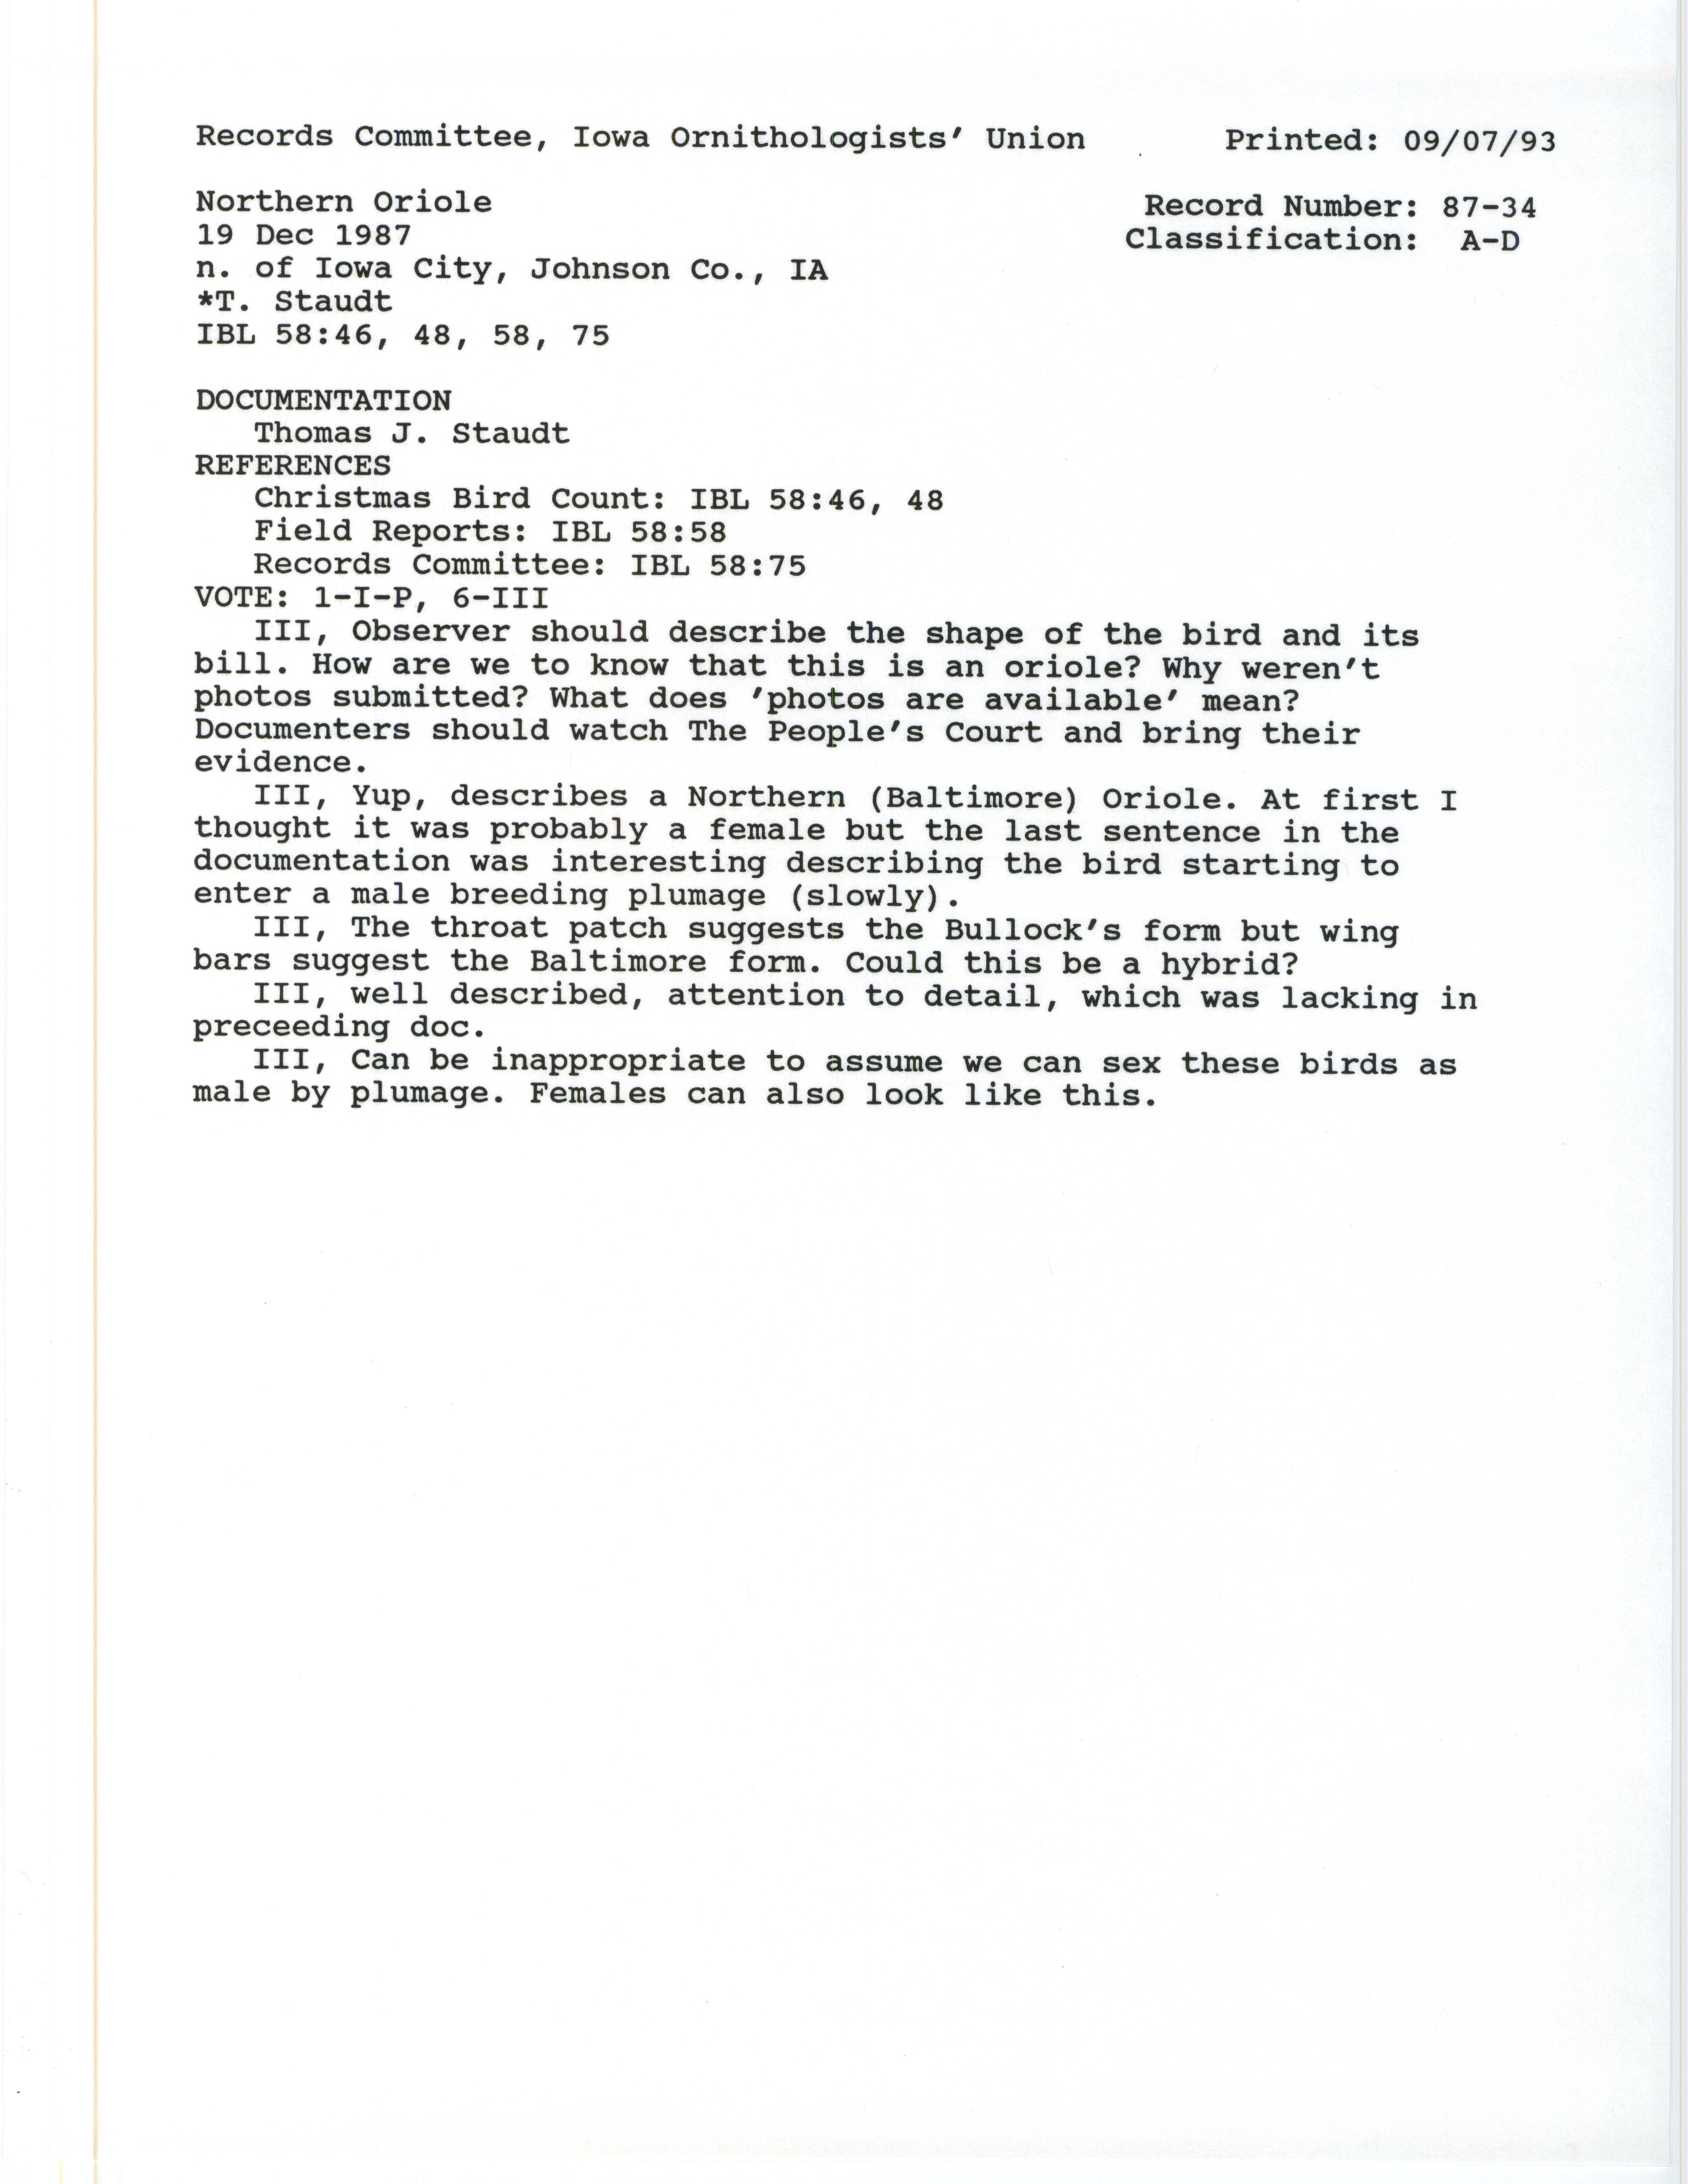 Records Committee review for rare bird sighting for Baltimore Oriole at Iowa City, 1987